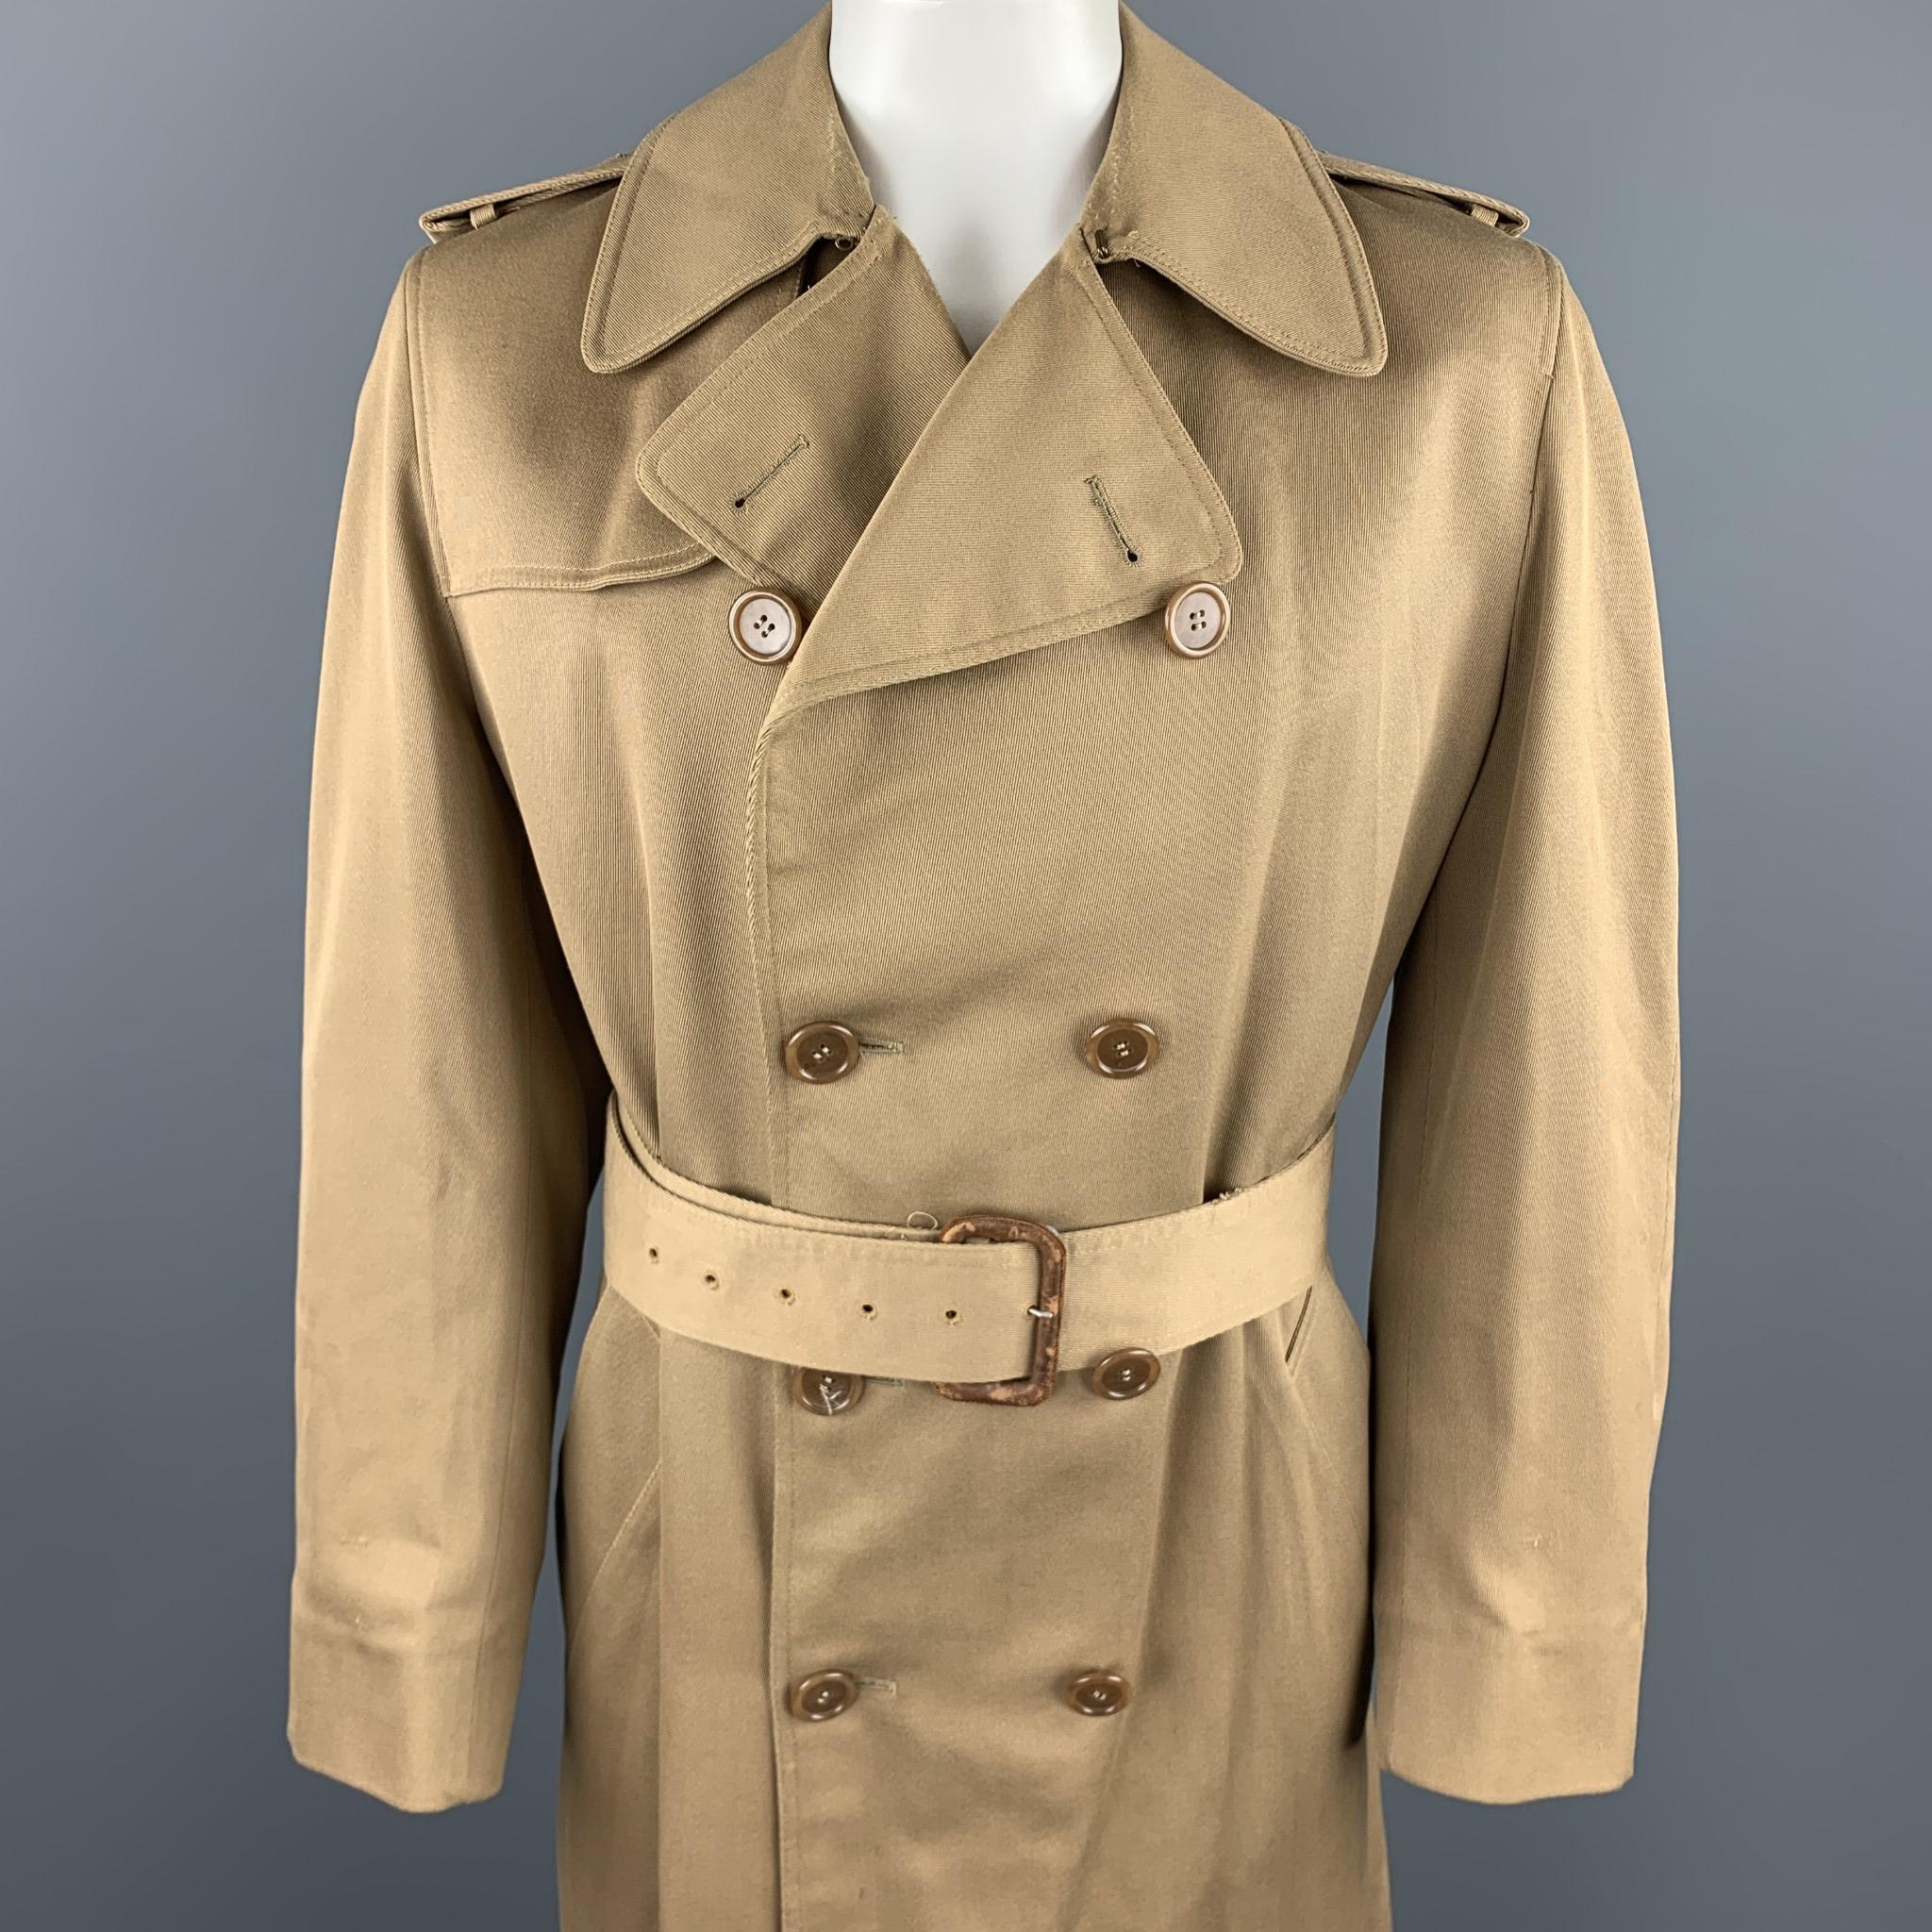 AQUASCUTUM trenchcoat comes in a khaki cotton / polyester with a full liner featuring a belted style, notch lapel, front pockets, epaulettes, and a double breasted closure. Made in Canada.

Good Pre-Owned Condition.
Marked: